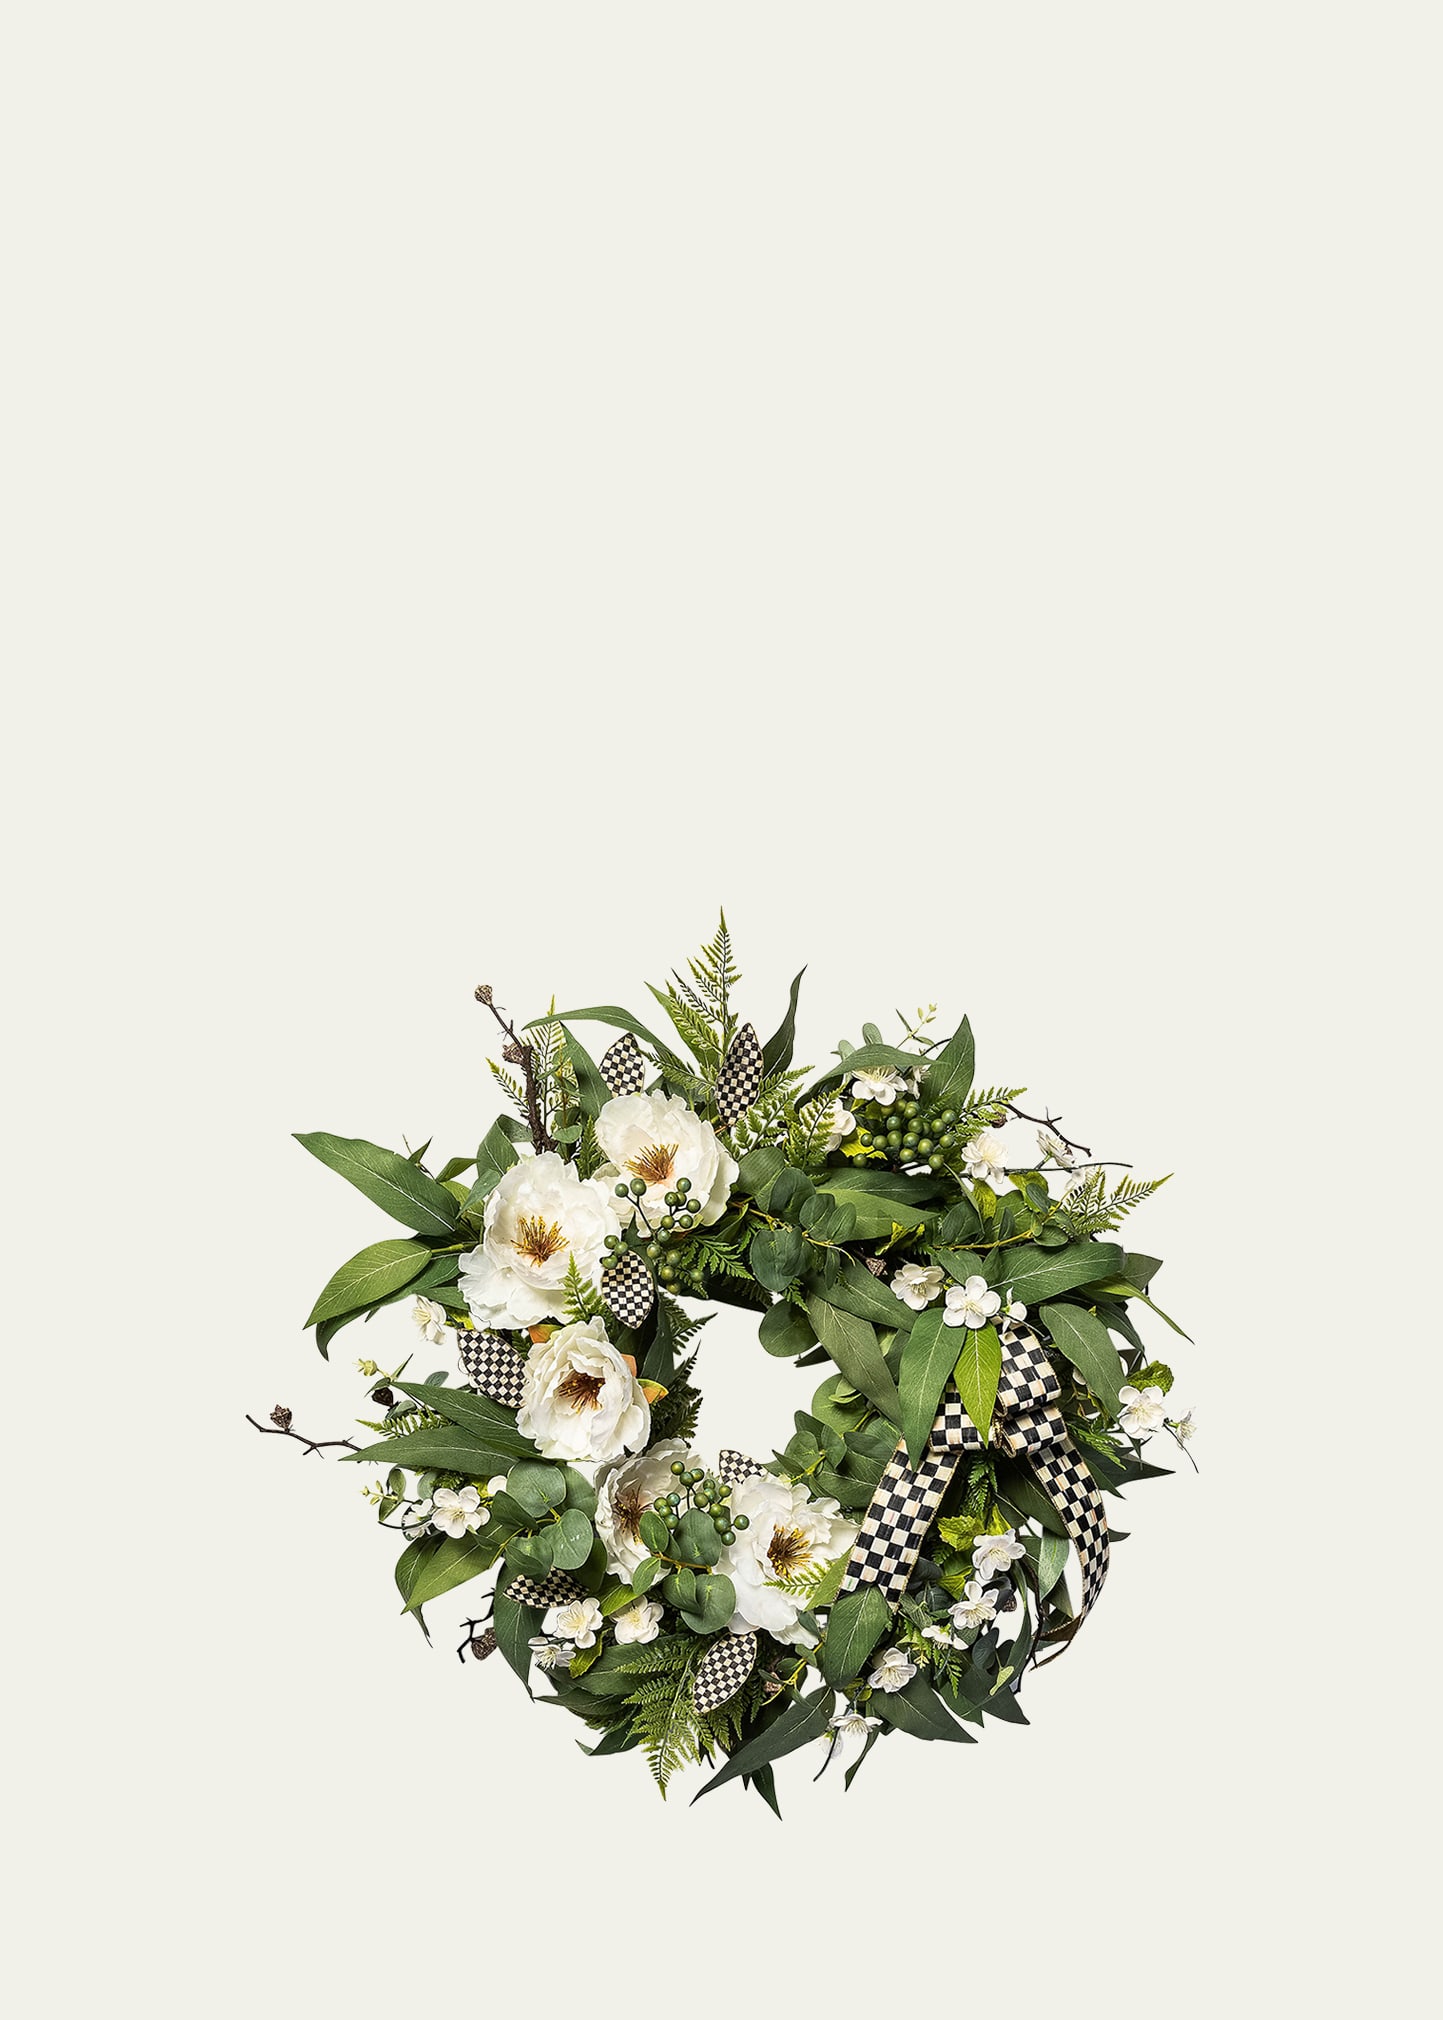 Mackenzie-childs Courtly Peony Wreath In Green